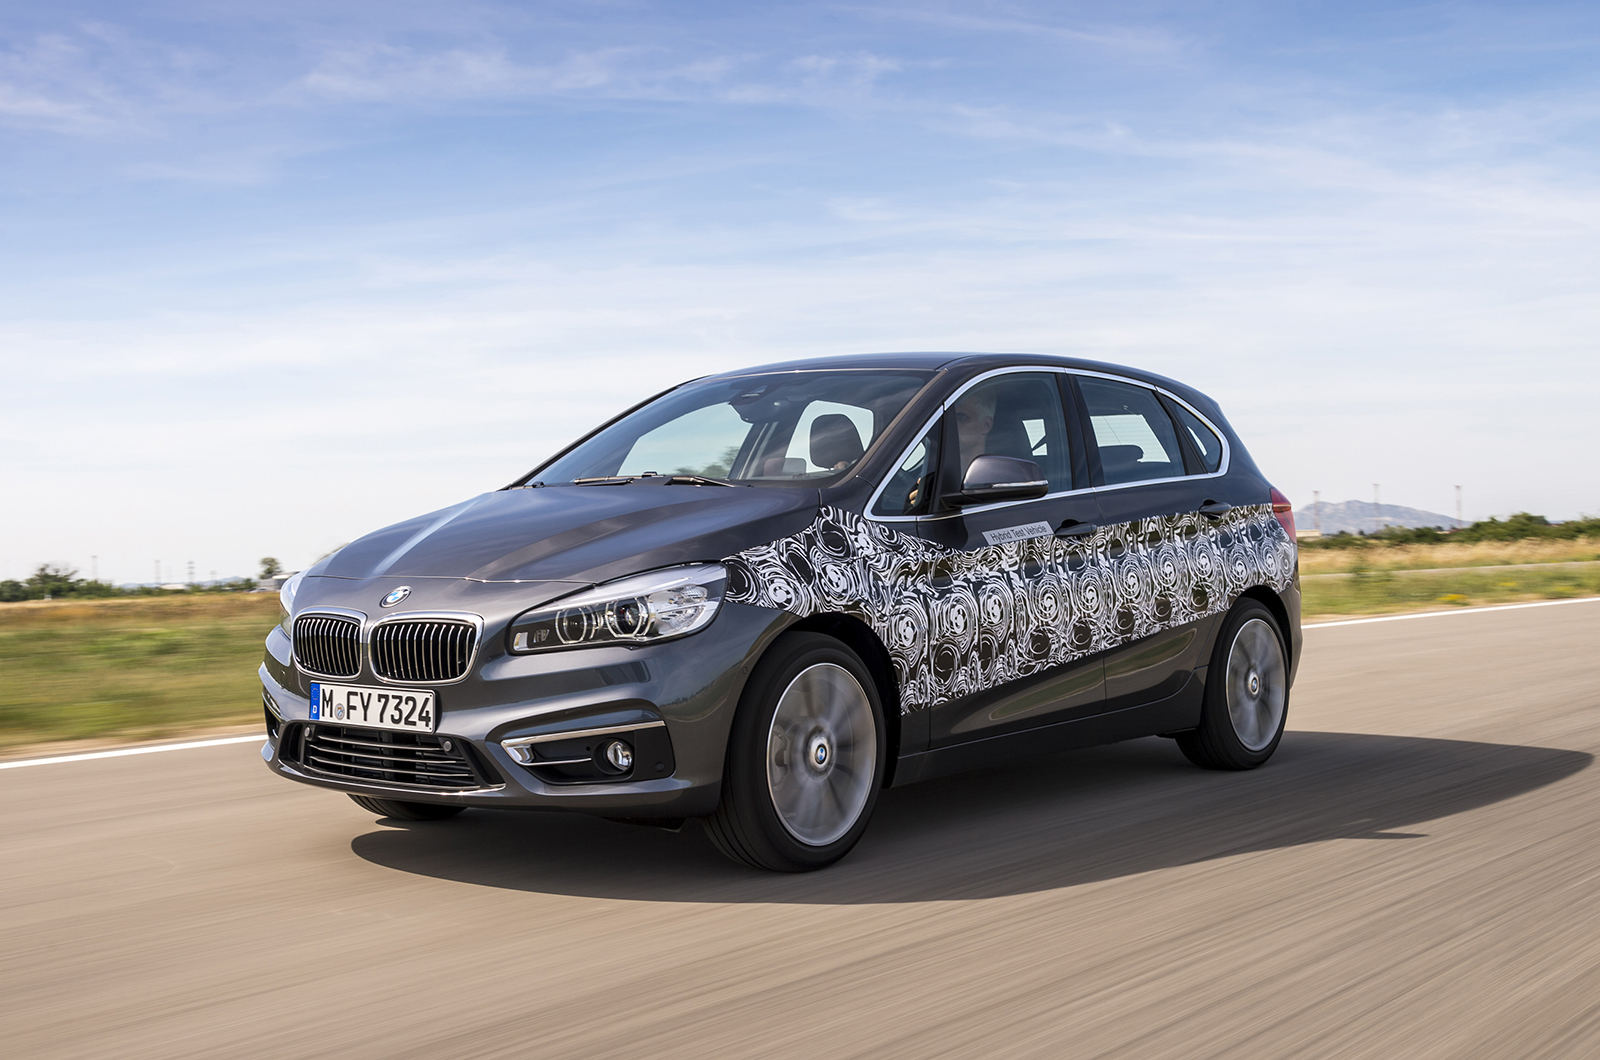 New 2 Series Active Tourer is the first modern BMW without an